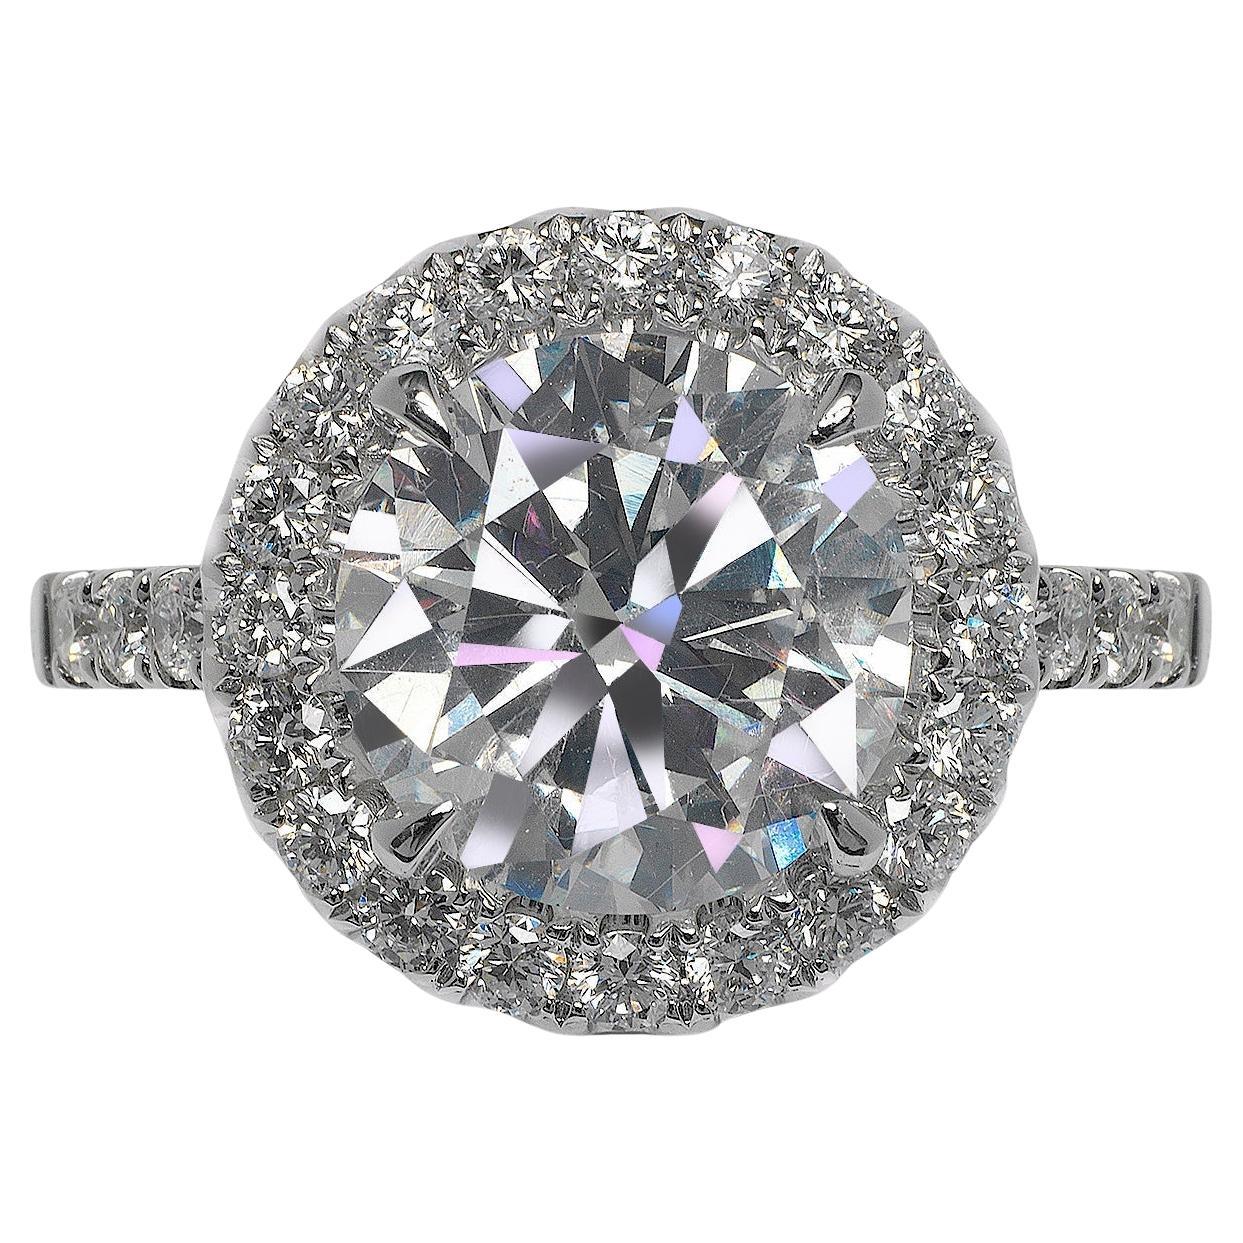 5 Carat Round Cut Diamond Engagement Ring EGL Certified E VS2 For Sale